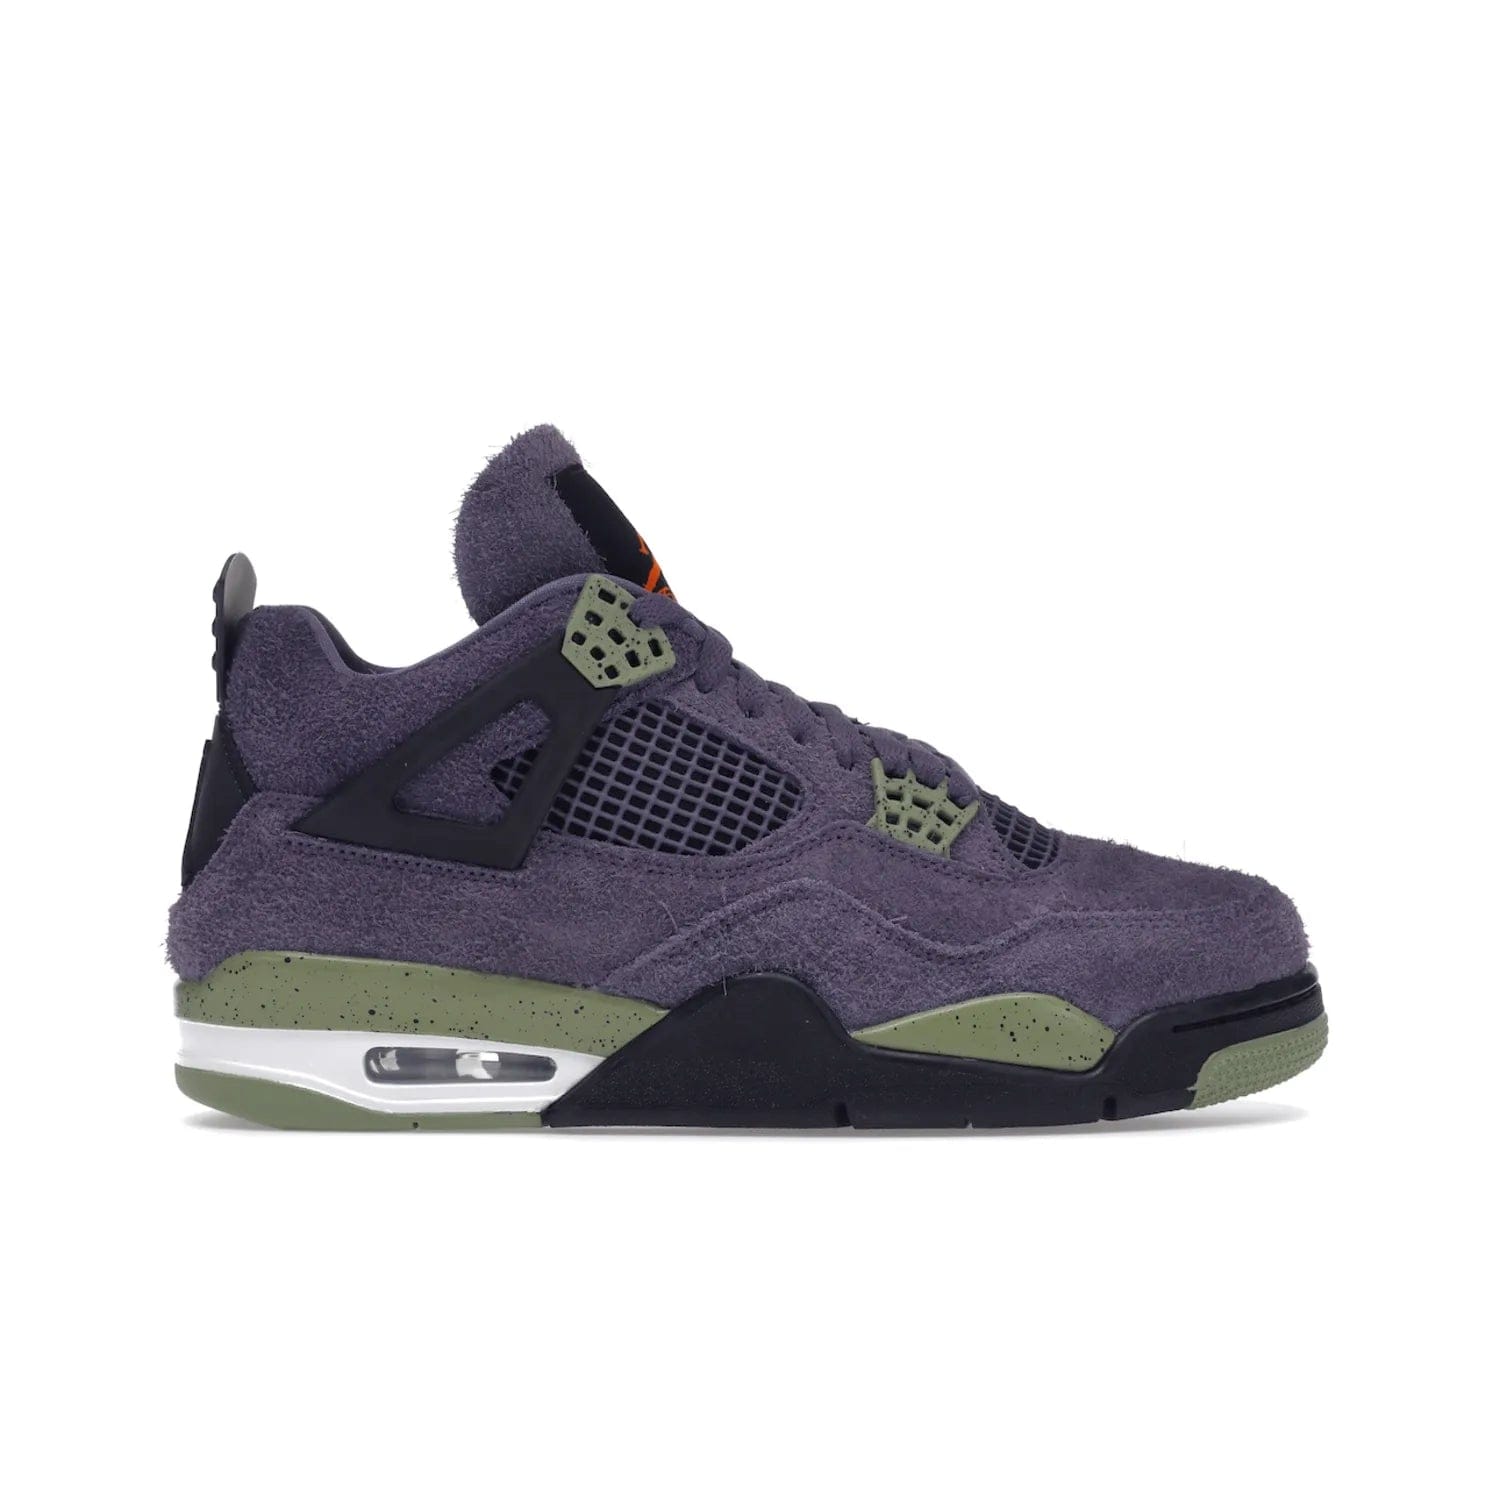 Jordan 4 Retro Canyon Purple (Women's) - Image 1 - Only at www.BallersClubKickz.com - New Air Jordan 4 Retro Canyon Purple W sneaker features shaggy purple suede, lime highlights & safety orange Jumpman branding. Classic ankle-hugging silhouette with modern colors released 15/10/2022.